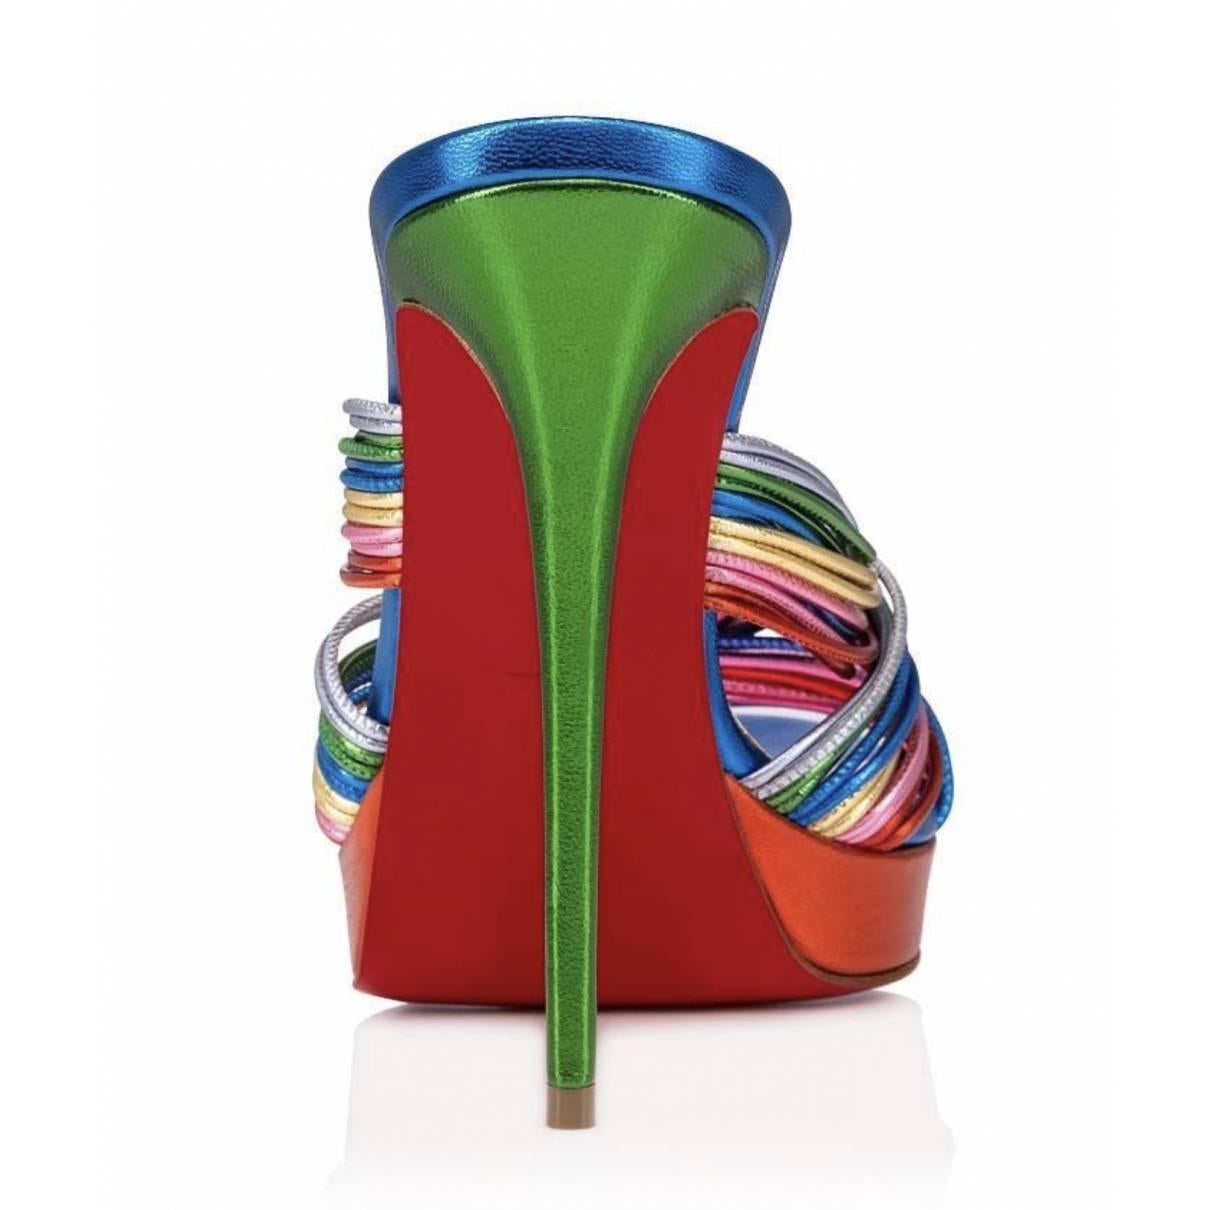 Multicolored leather mules from Christian Louboutin. The Multitaski mule pumps is made of goat leather, anchored together with a flurry of multicolored straps that are artfully knotted together, mounted on a slim 120 mm heel. Brand new, never worn.